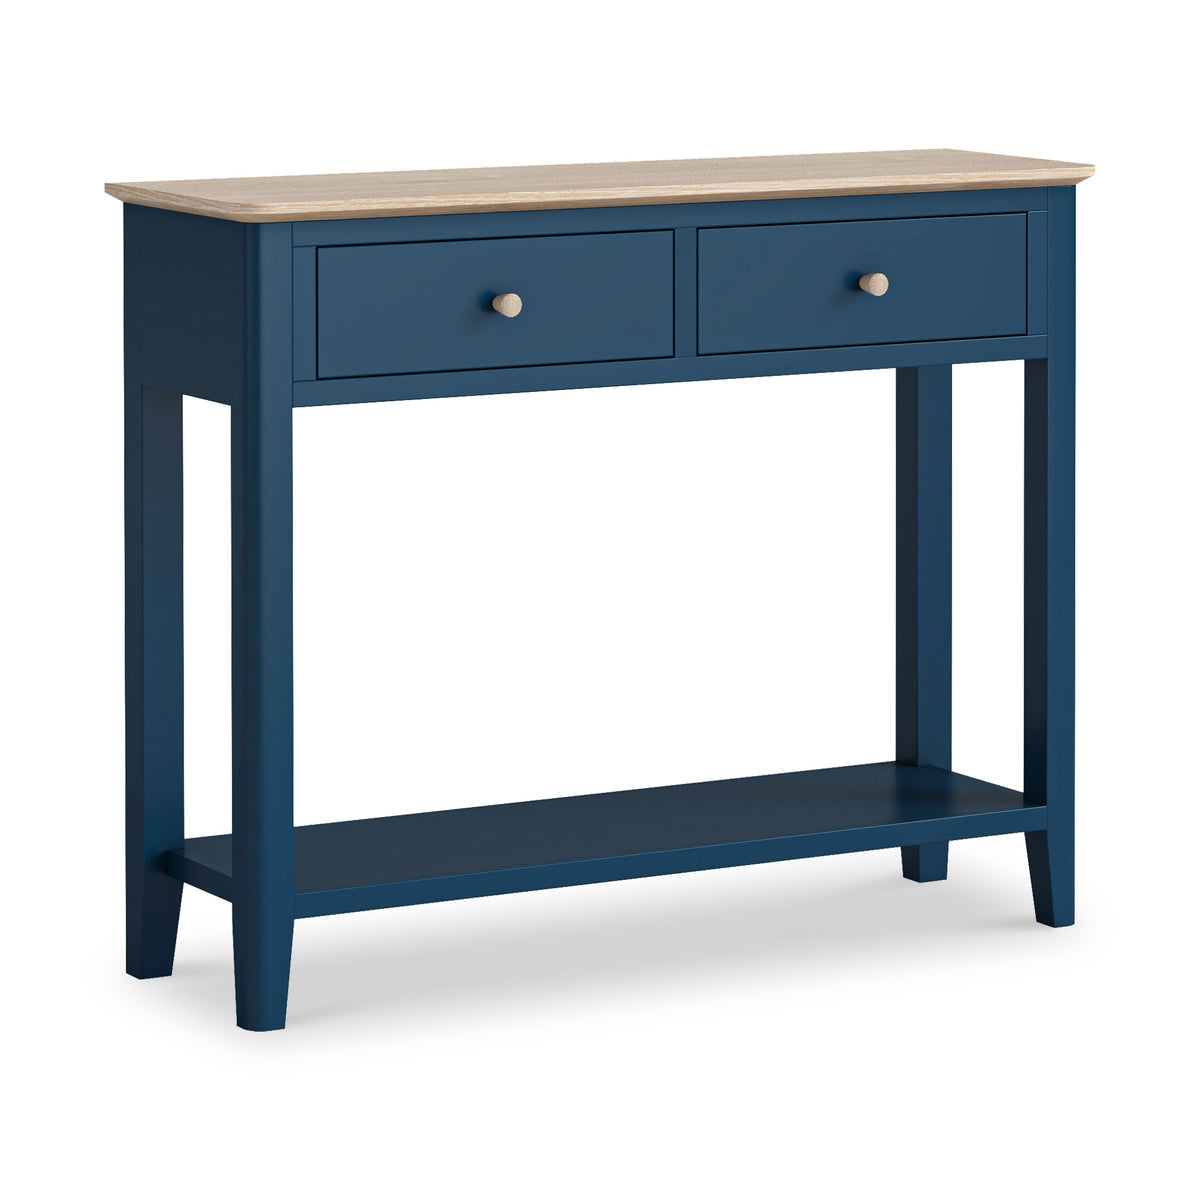 Penrose Navy Blue Console Table with wooden handles from Roseland Furniture